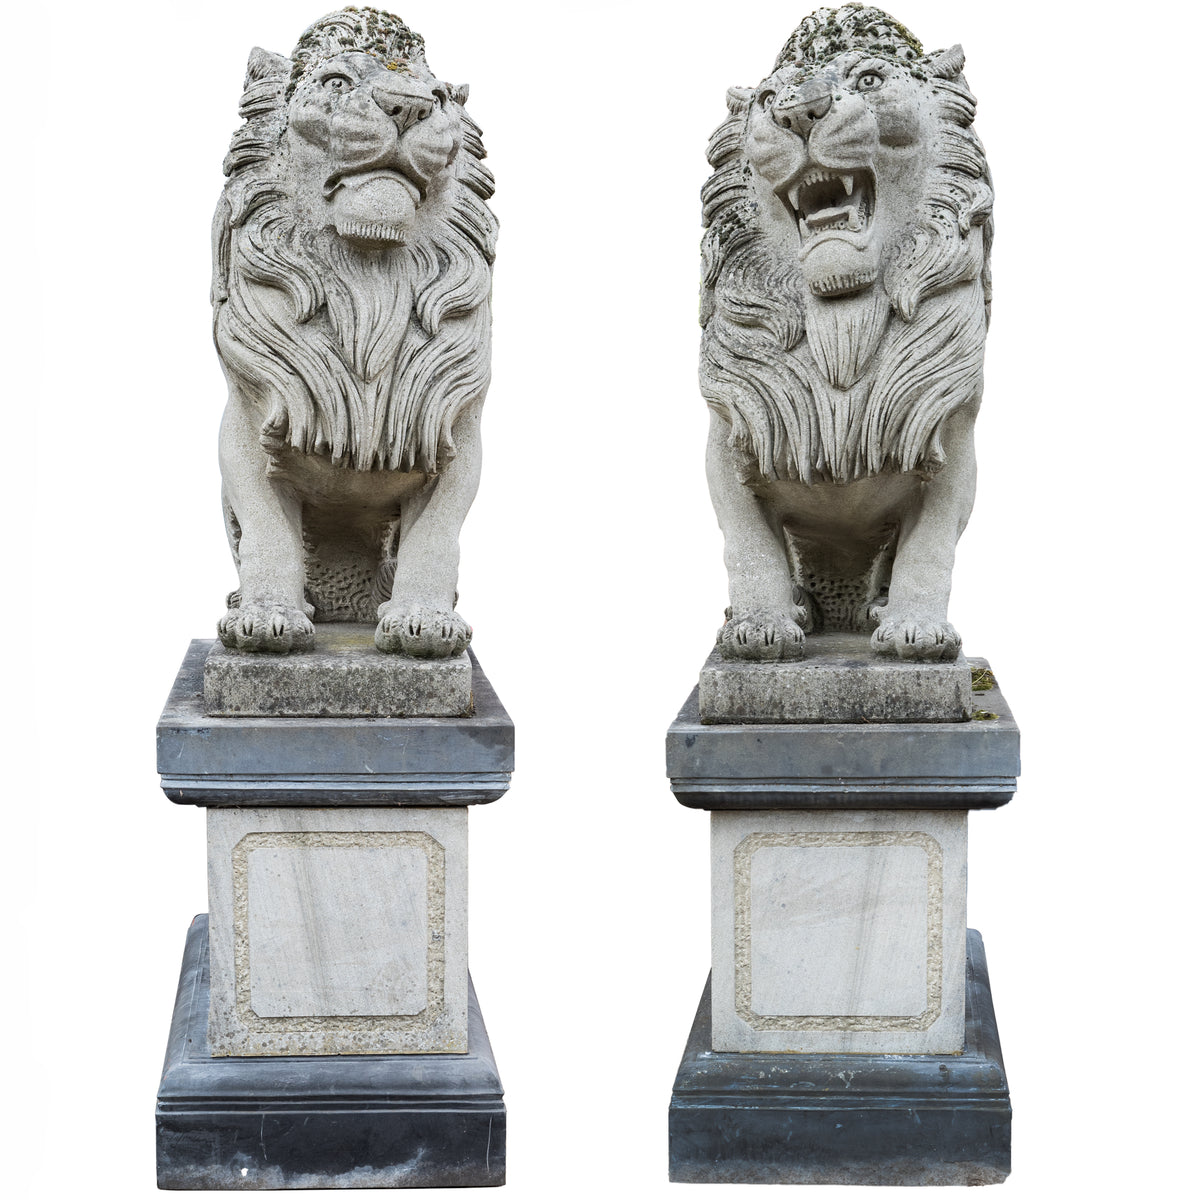 Reclaimed Pair of Monumental Stone Lions on their own Plinth | The Architectural Forum